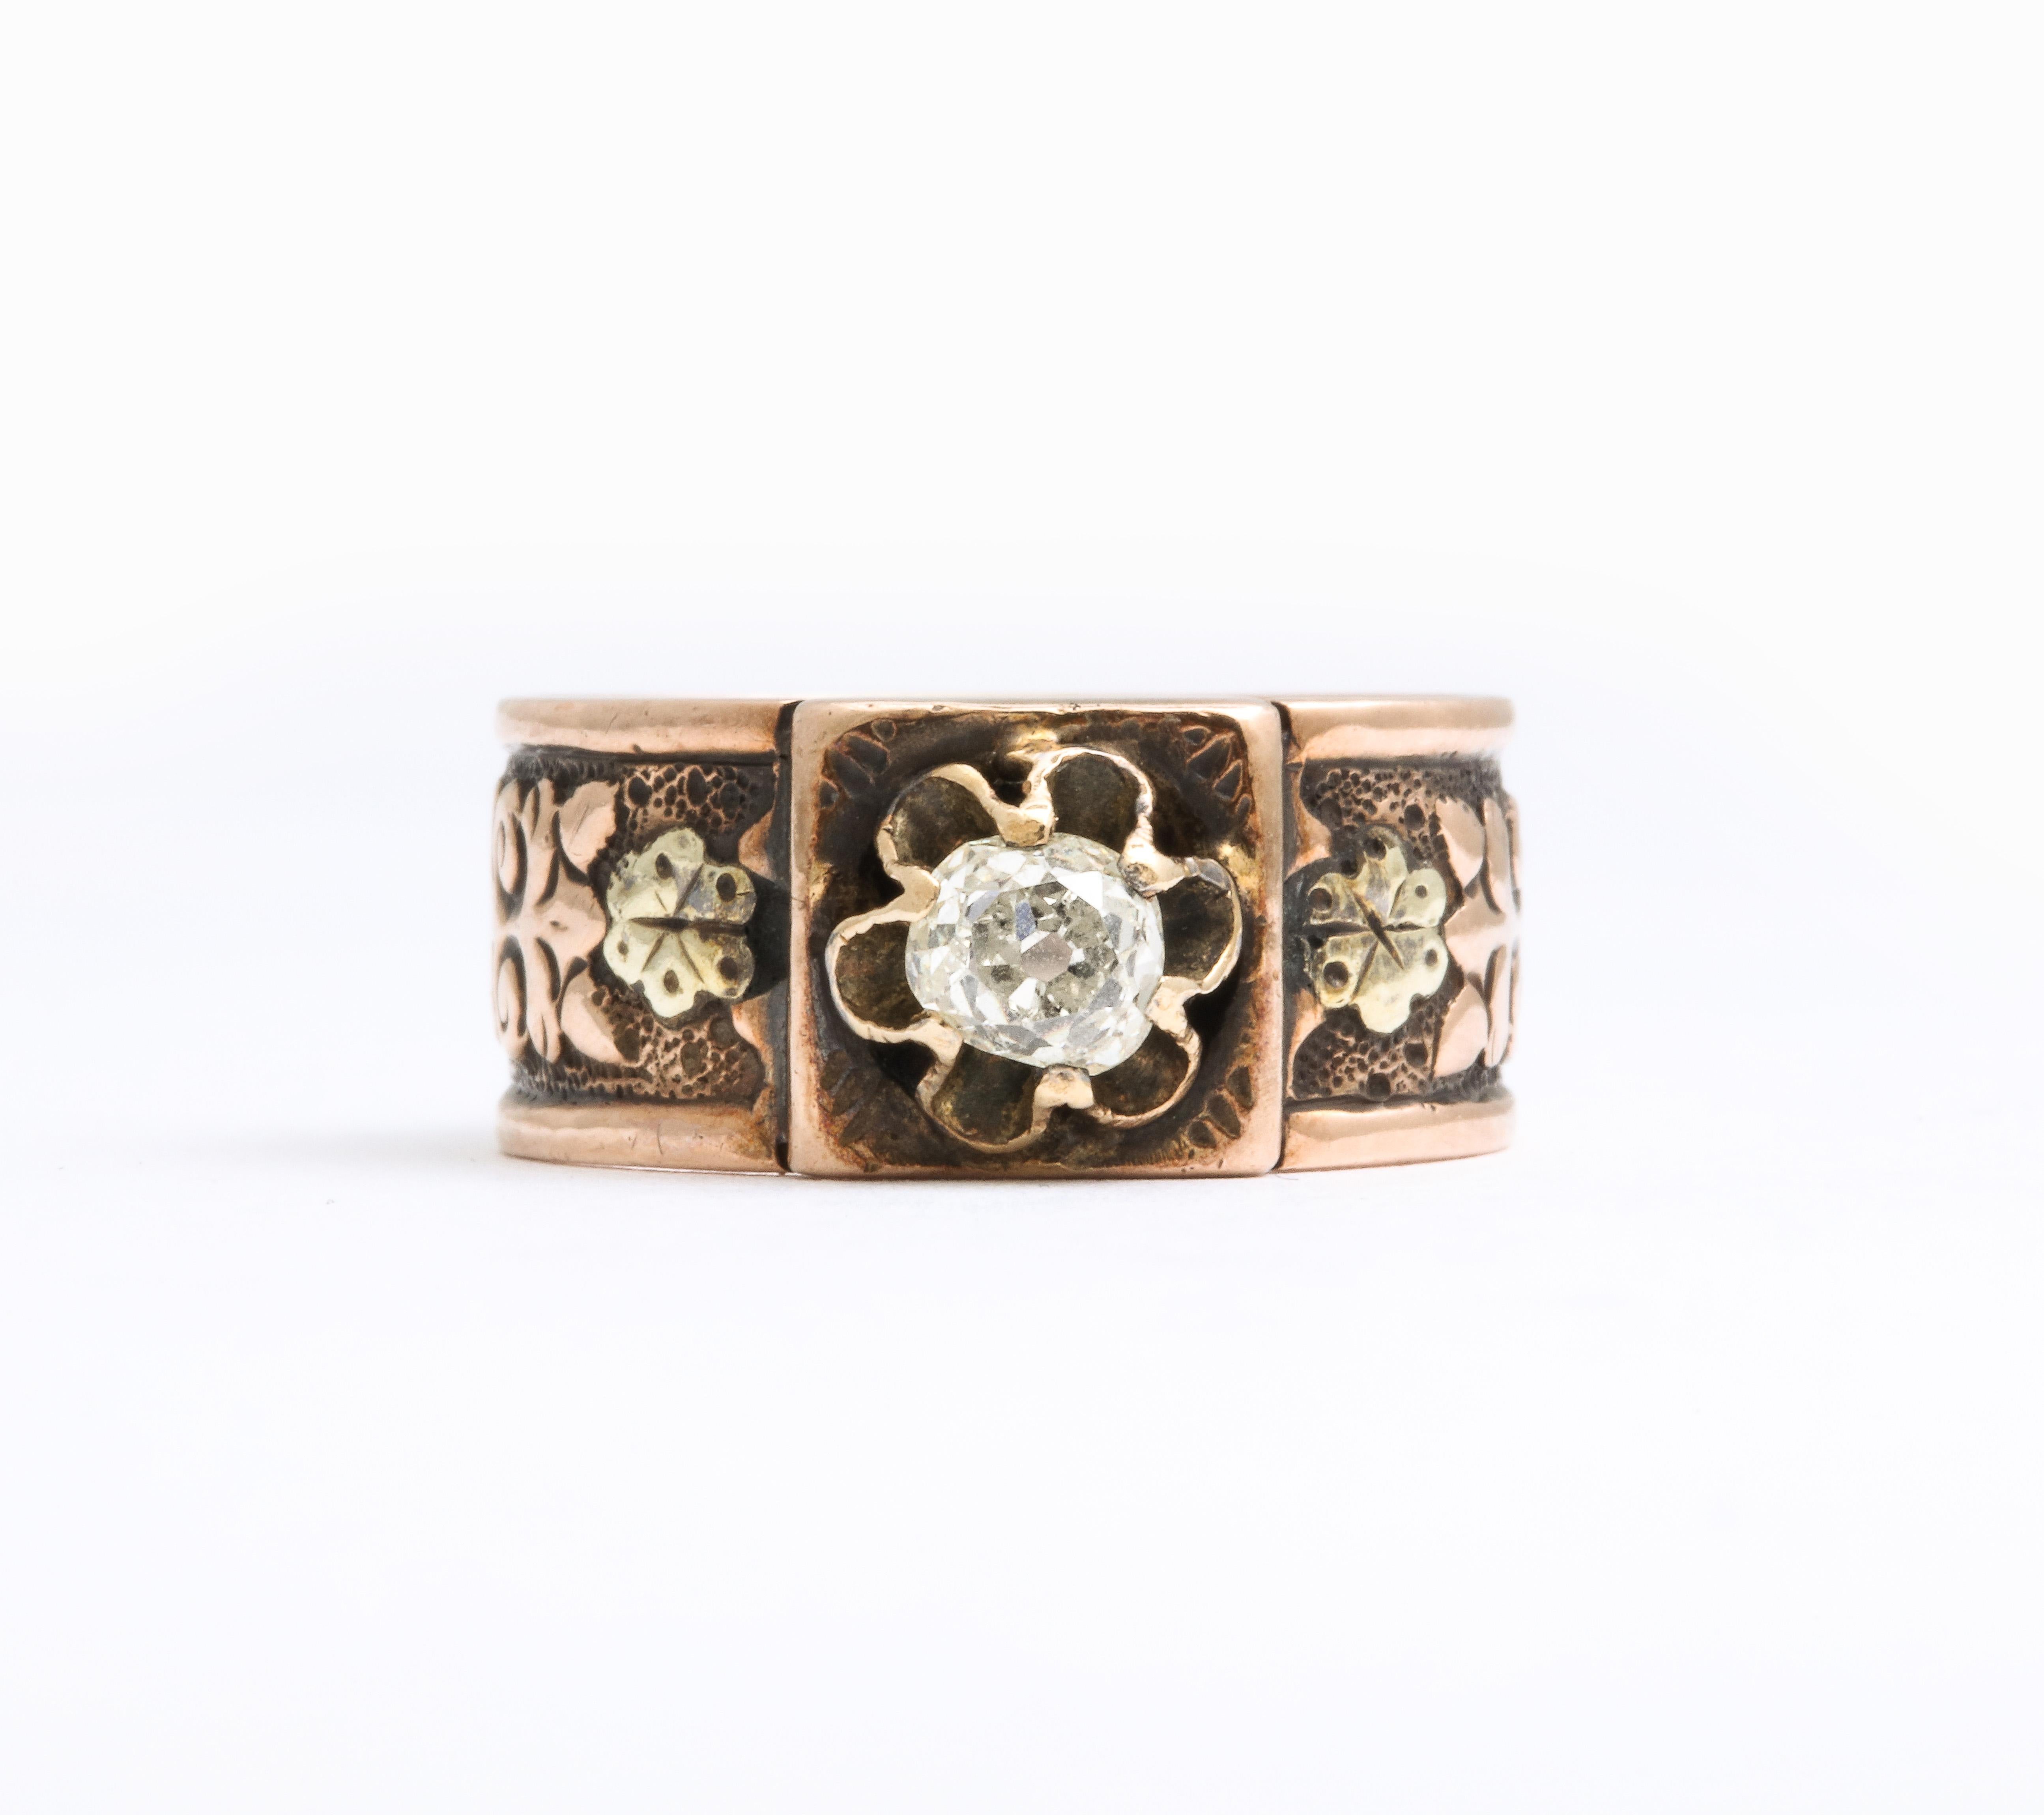 On a 14 Kt band with raised engraving of flowers and swirls, a .30 old European diamond is raised in a flower setting that is the focus of this ring. The borders are raised and unengraved. Texture is what stands out here. Emphasizing that texture,